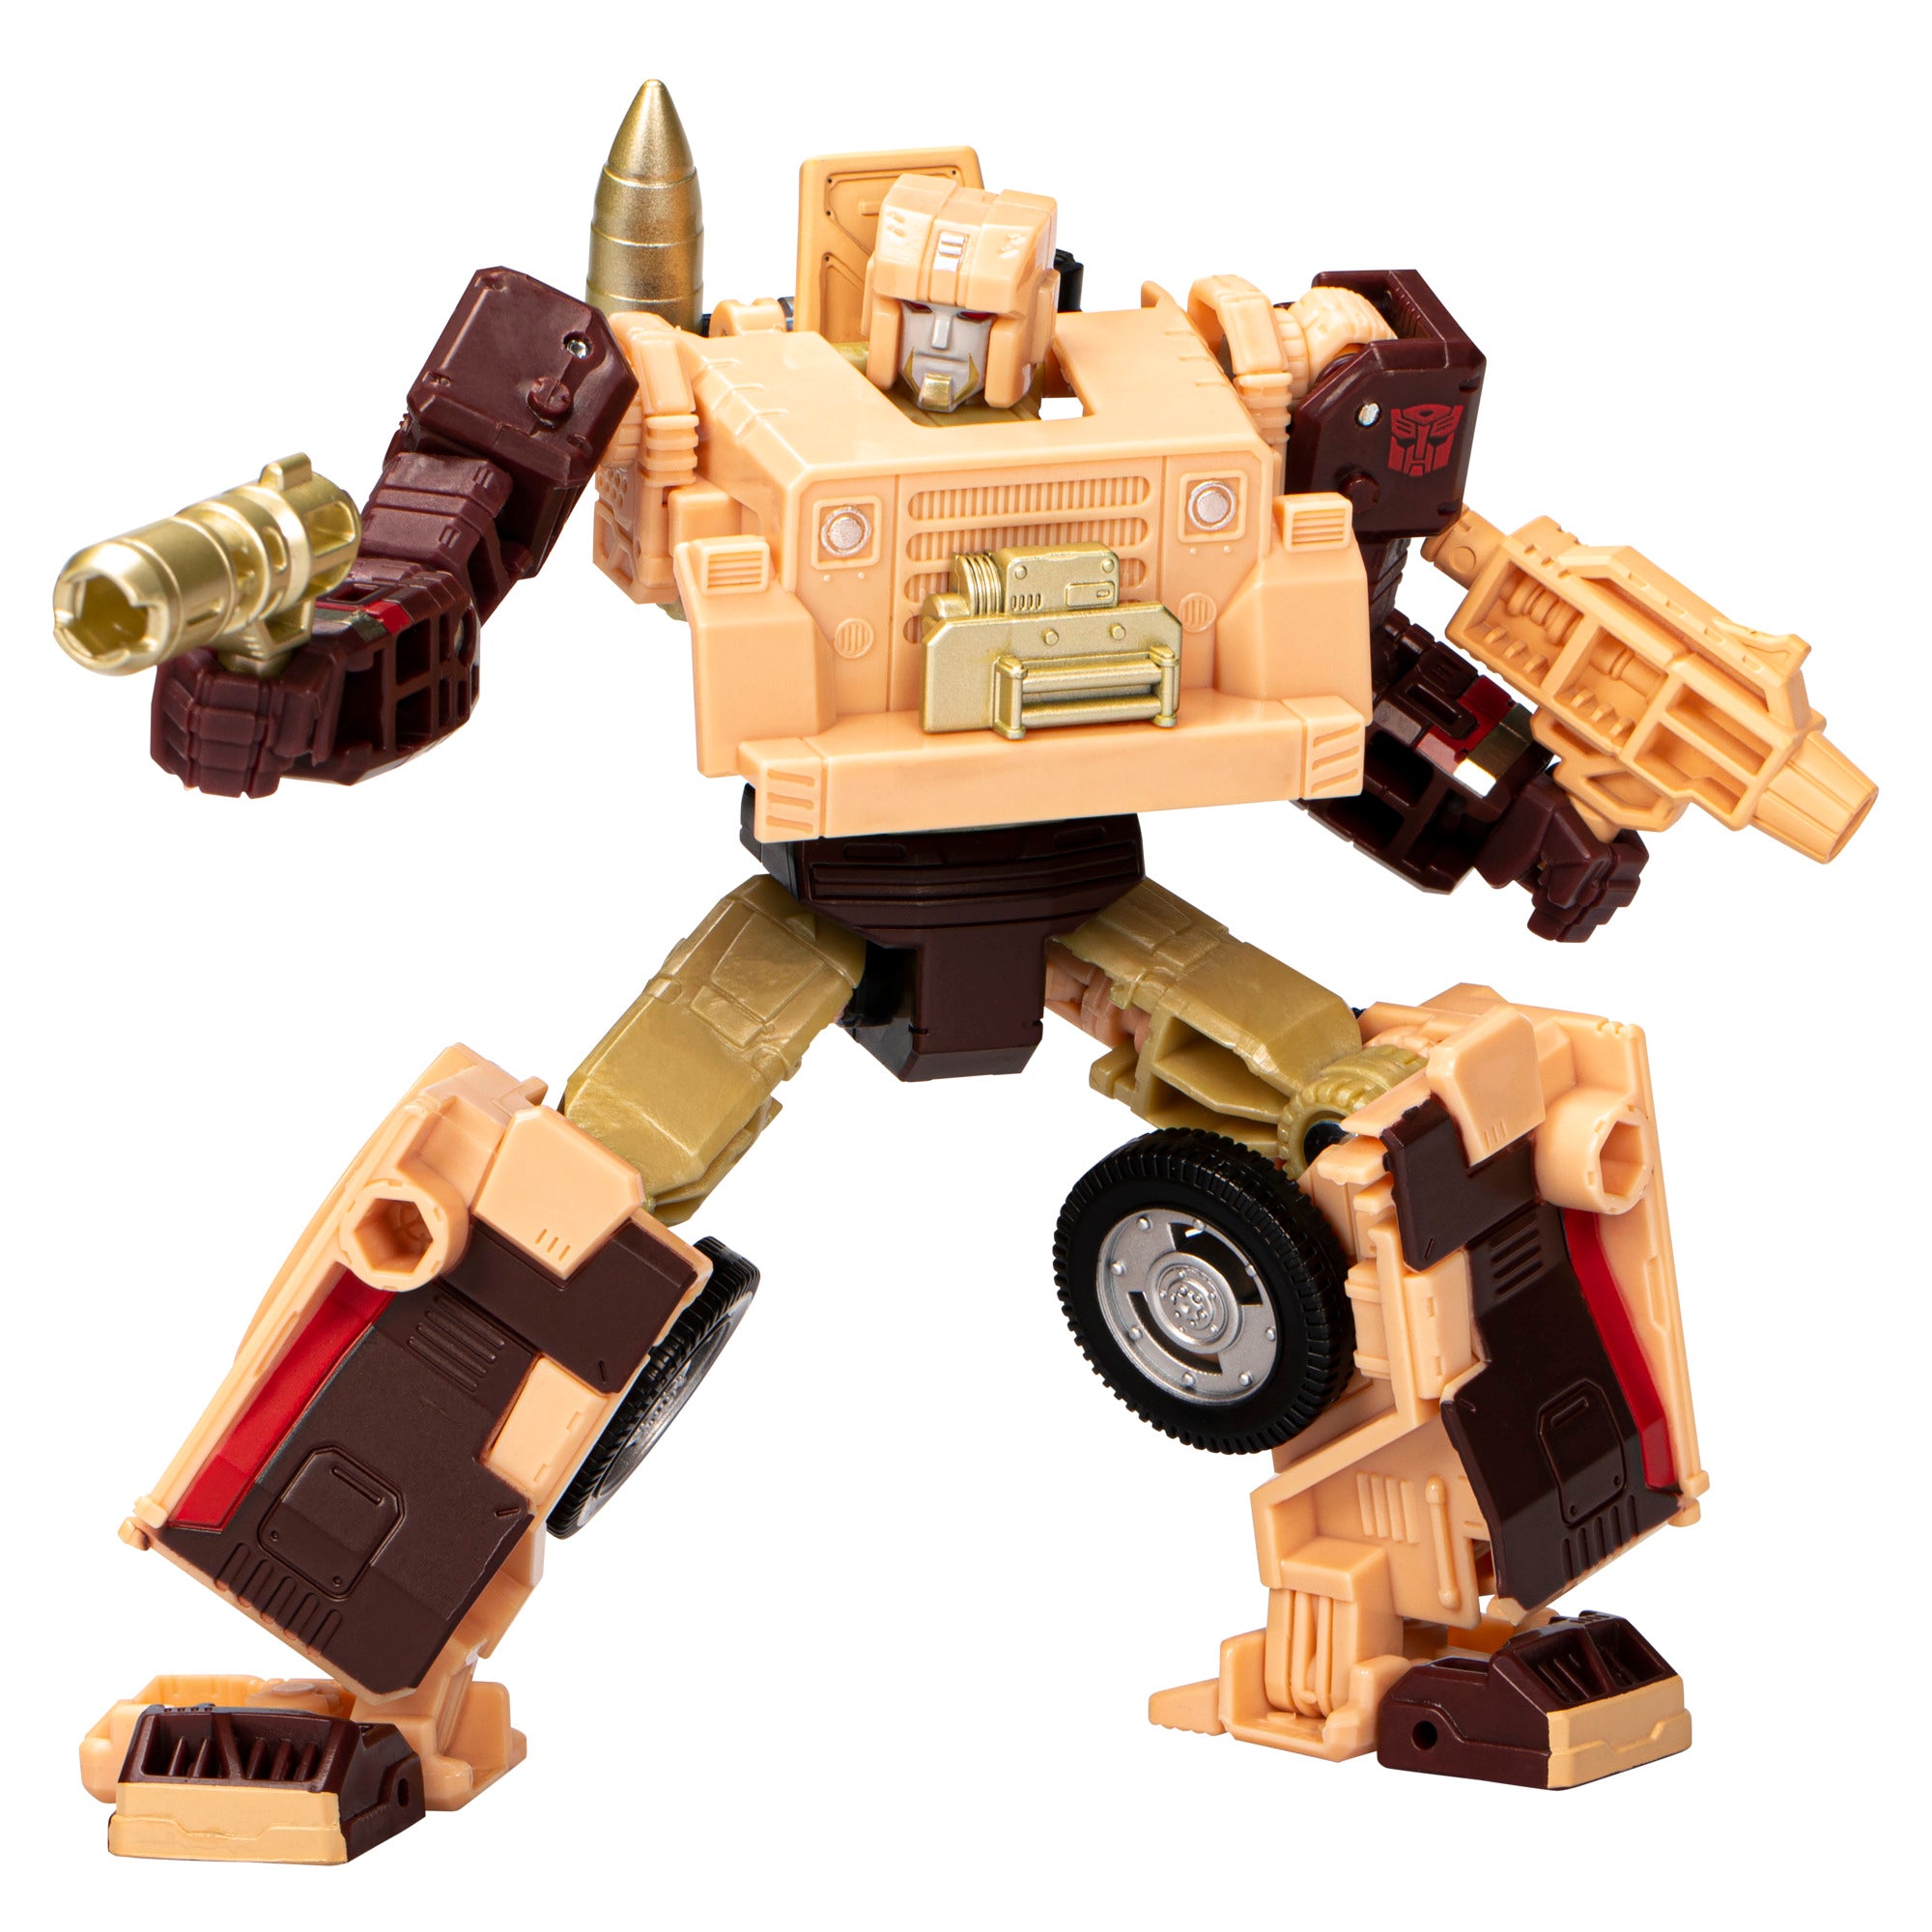 Generations Legacy Knock Out Toy Review